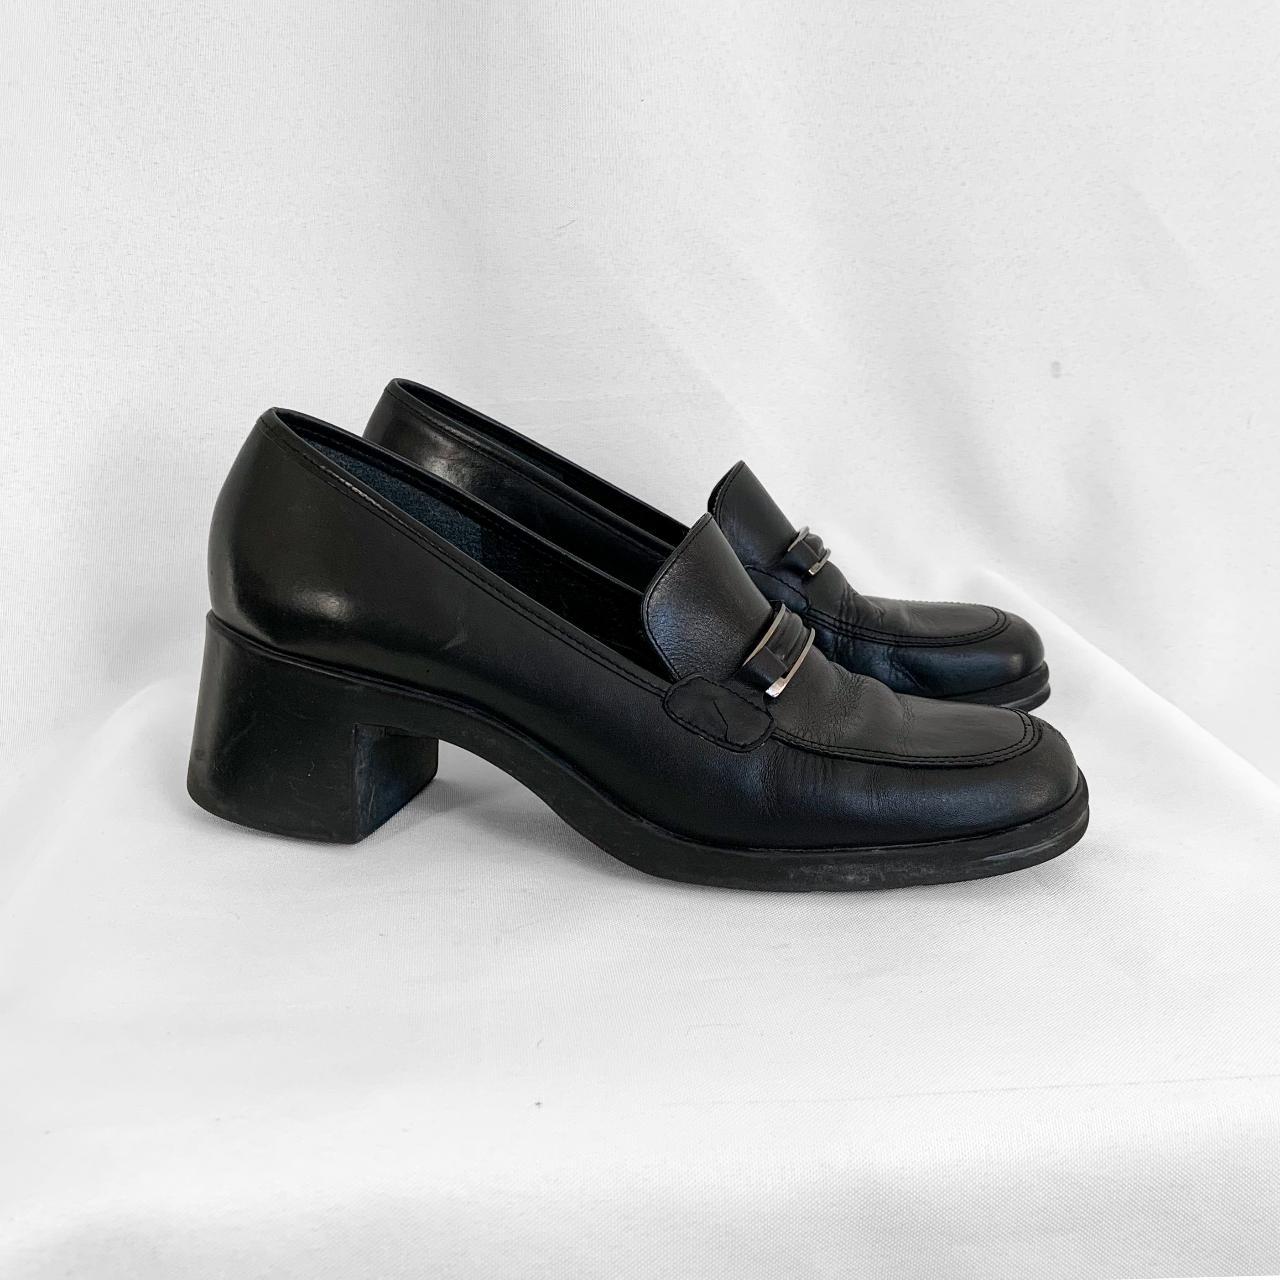 Women's Black and Silver Loafers | Depop